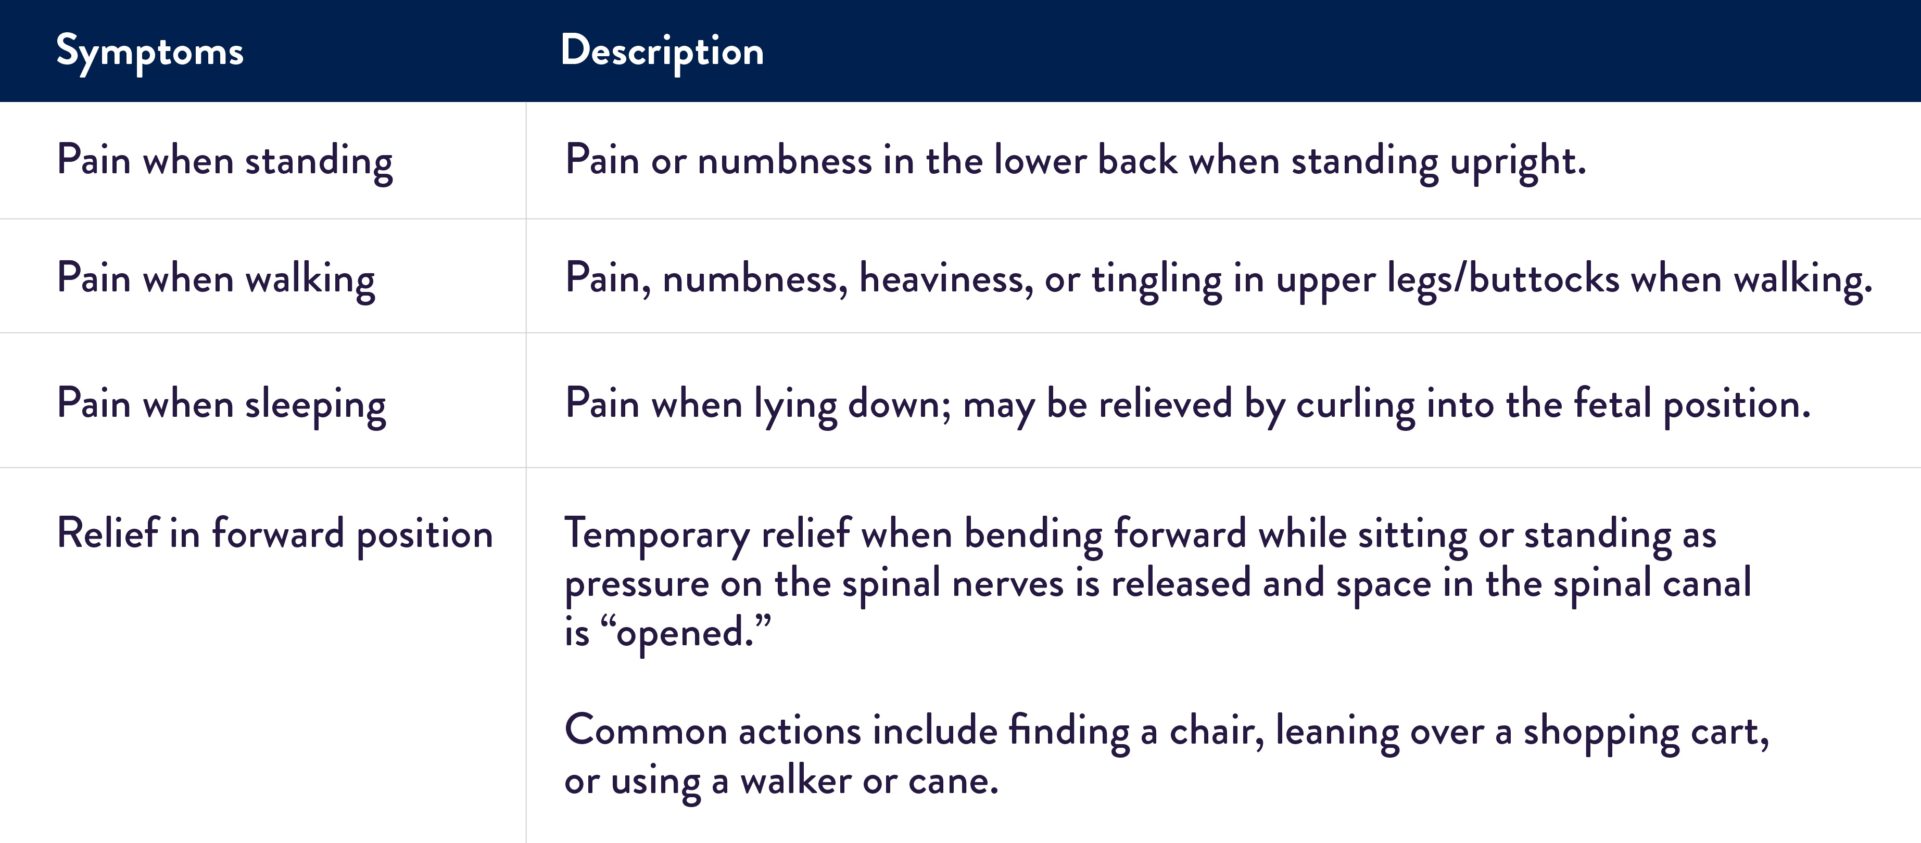 Chart showing descriptions of symptoms for people suffering from lumbar stenosis with neurogenic claudication